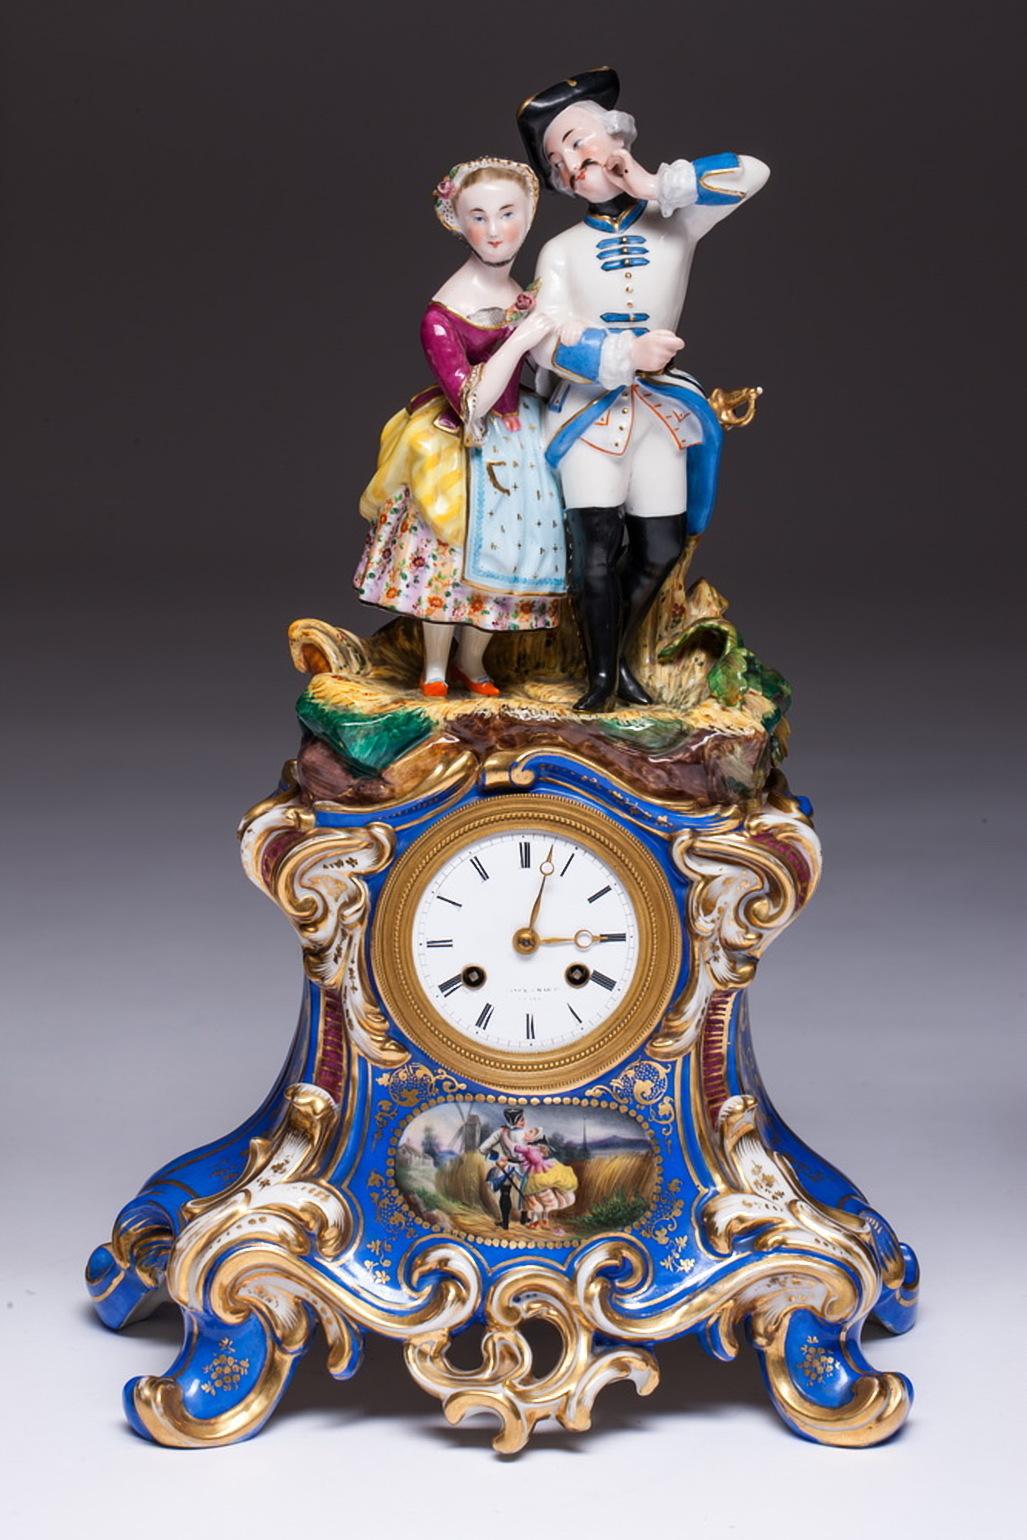 Three-piece old Paris porcelain mantel garniture in the rococo manner. A two-piece old Paris porcelain clock. The top half features a figures of a couple, soldier and a woman standing on the grass. The bottom half of the clock is painted with a